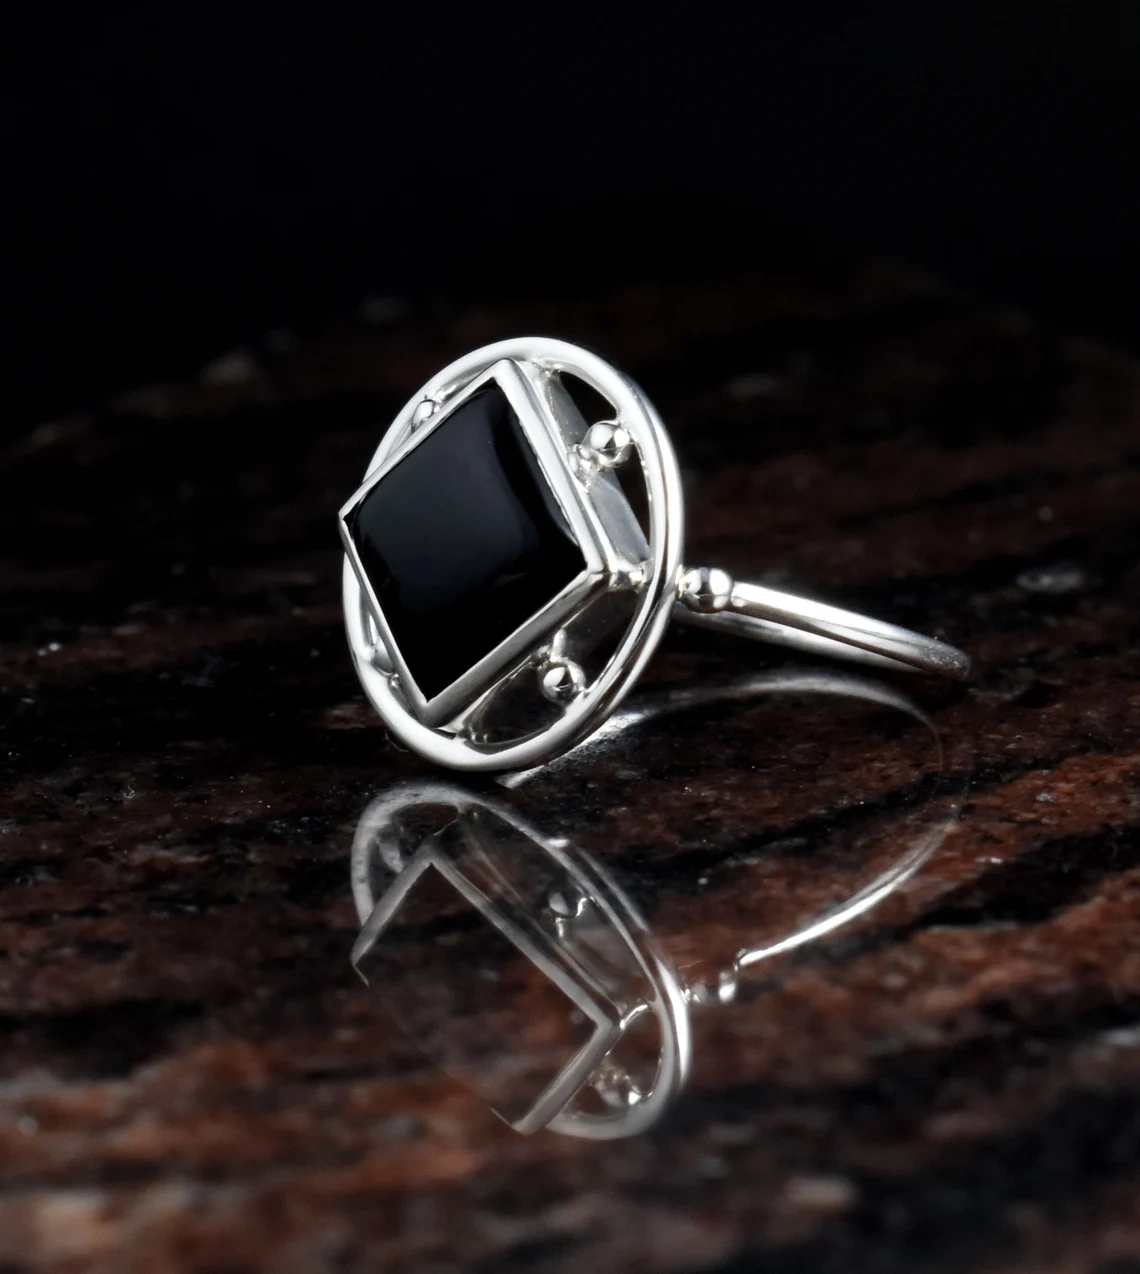 Black Onyx Square Smooth Stone 925 Sterling Silver Ring Promise Ring, Stone Ring, Dainty Ring, Unique Ring, Black Stone Ring-10 3/4 US/Uk size – V-2